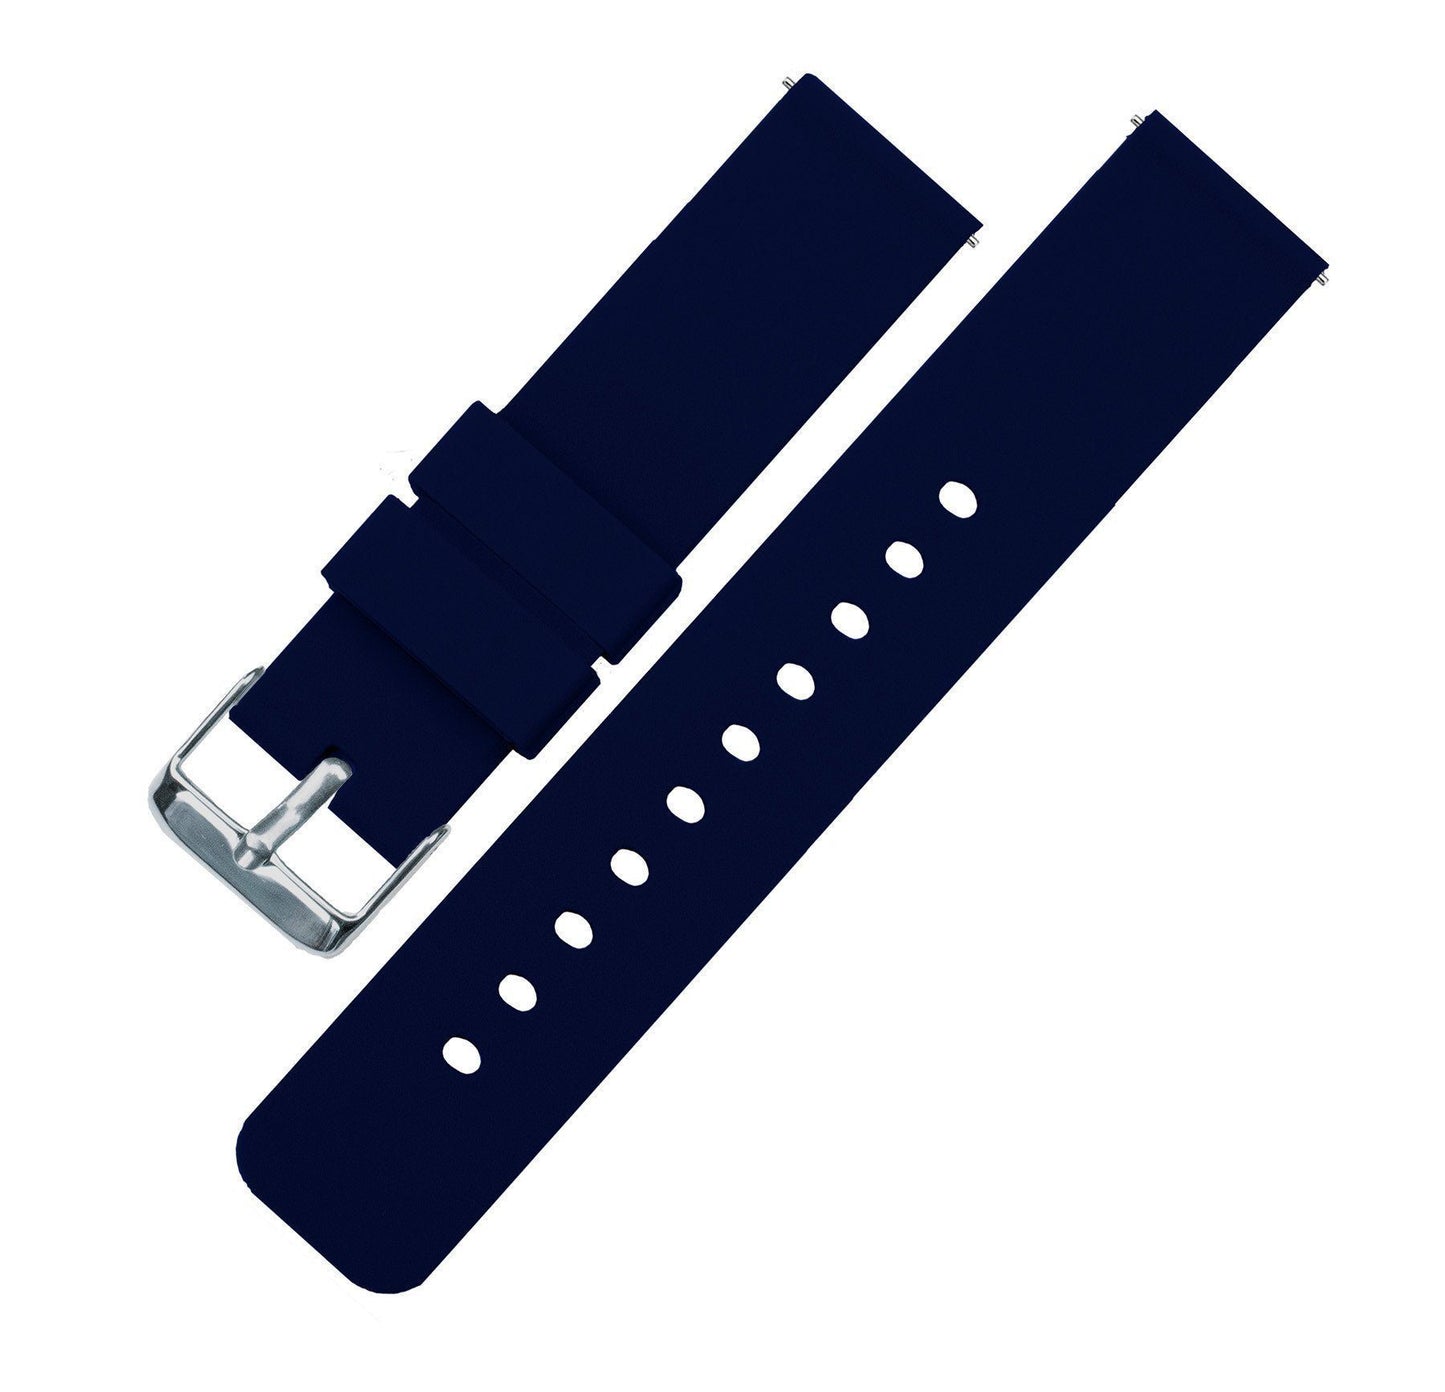 Navy Blue | Soft Silicone - Barton Watch Bands